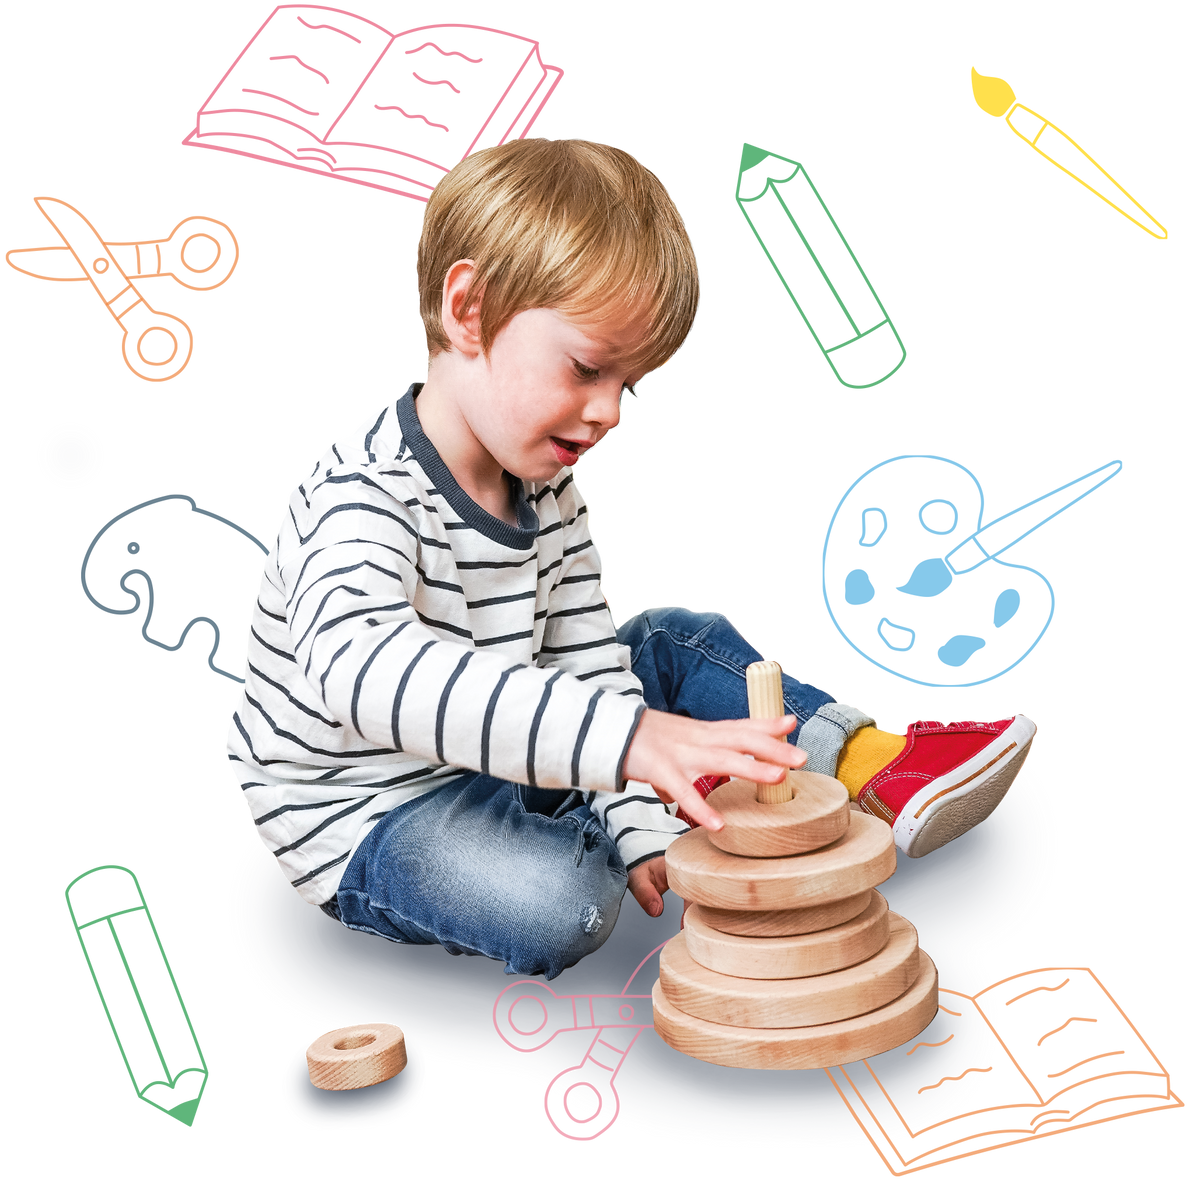 Boy playing with stacker toy